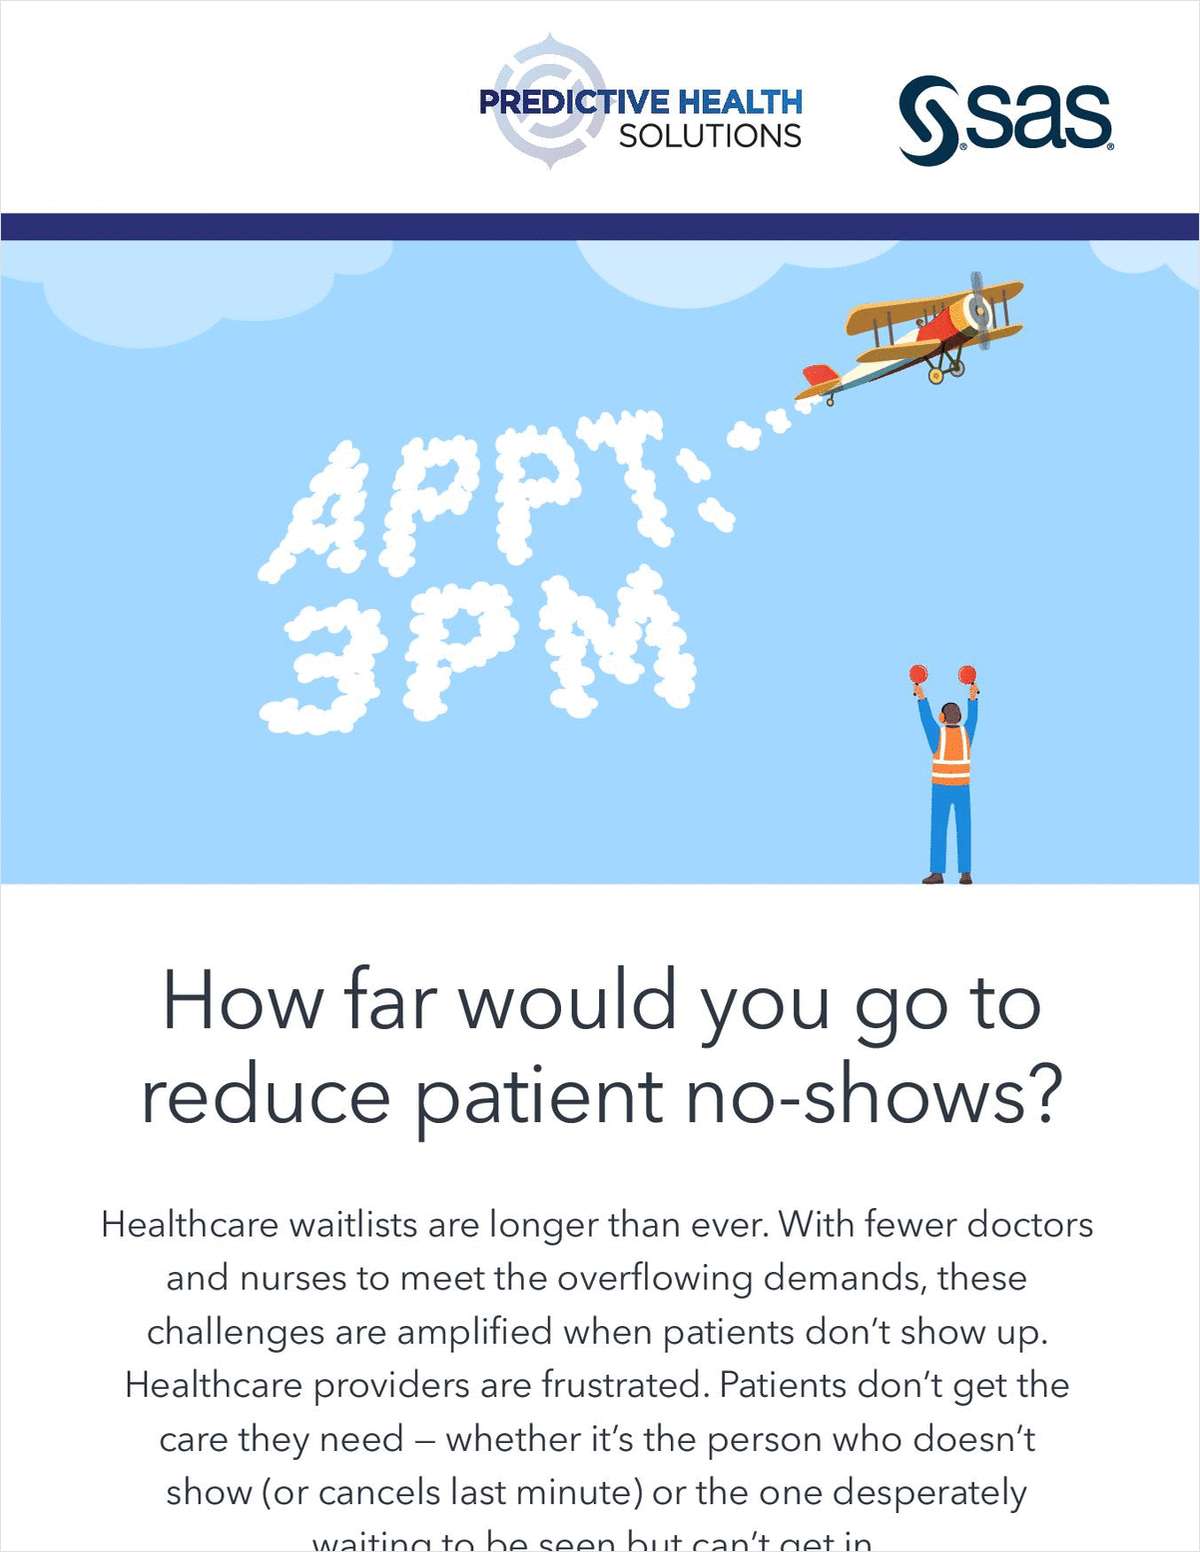 How far would you go to reduce patient no-shows?